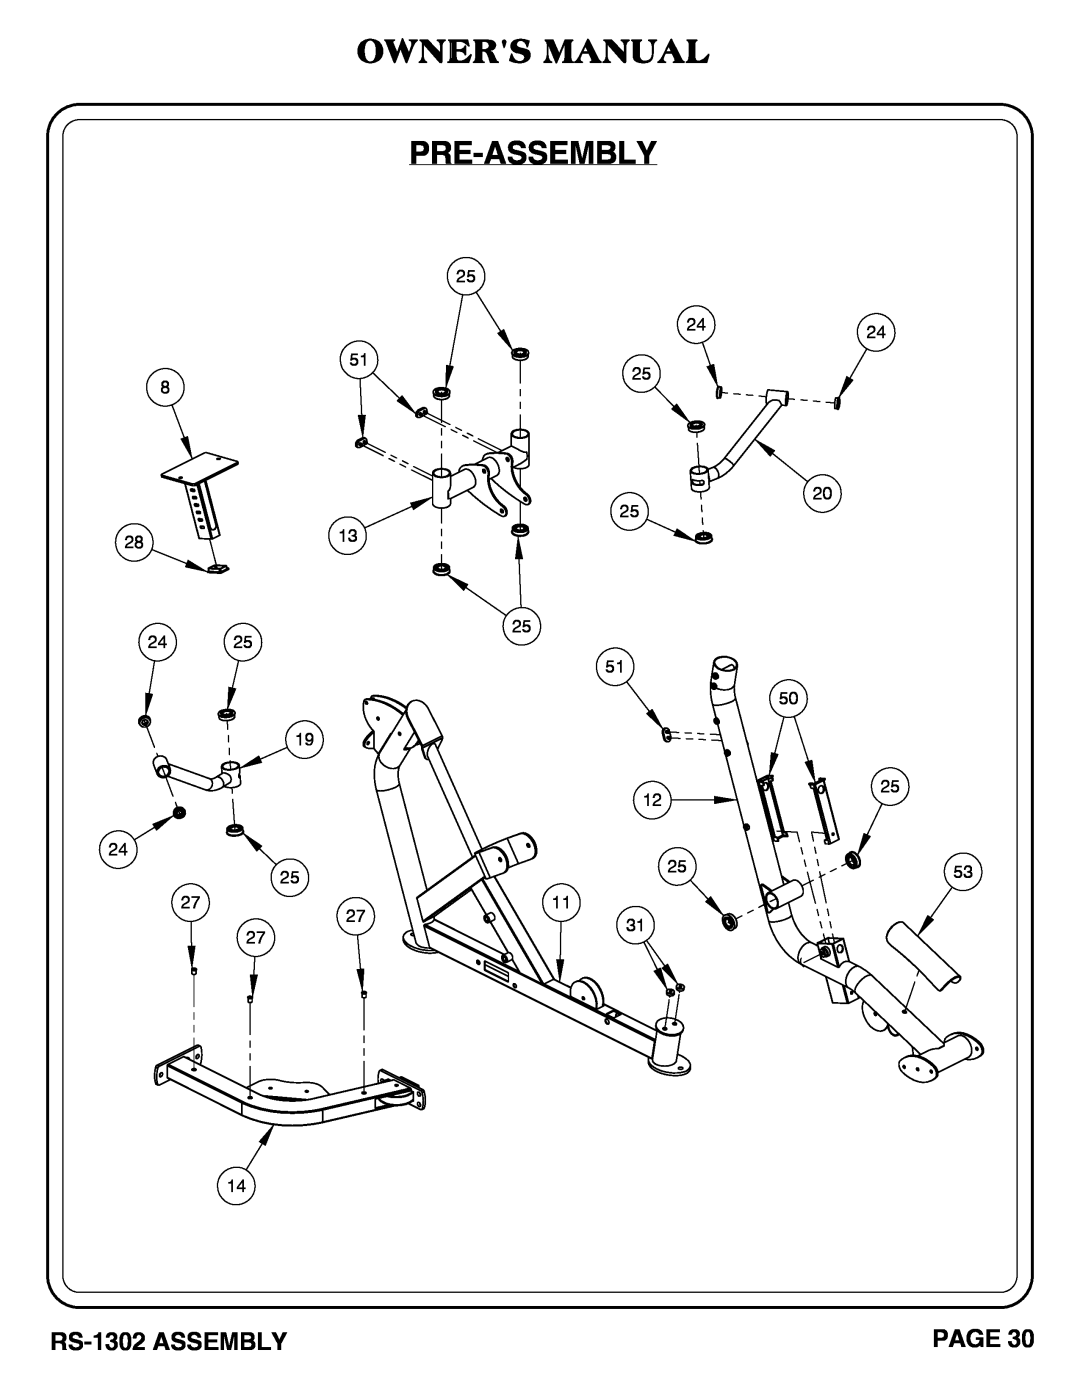 Hoist Fitness owner manual Owners Manual Pre-Assembly, RS-1302 ASSEMBLY, Page 